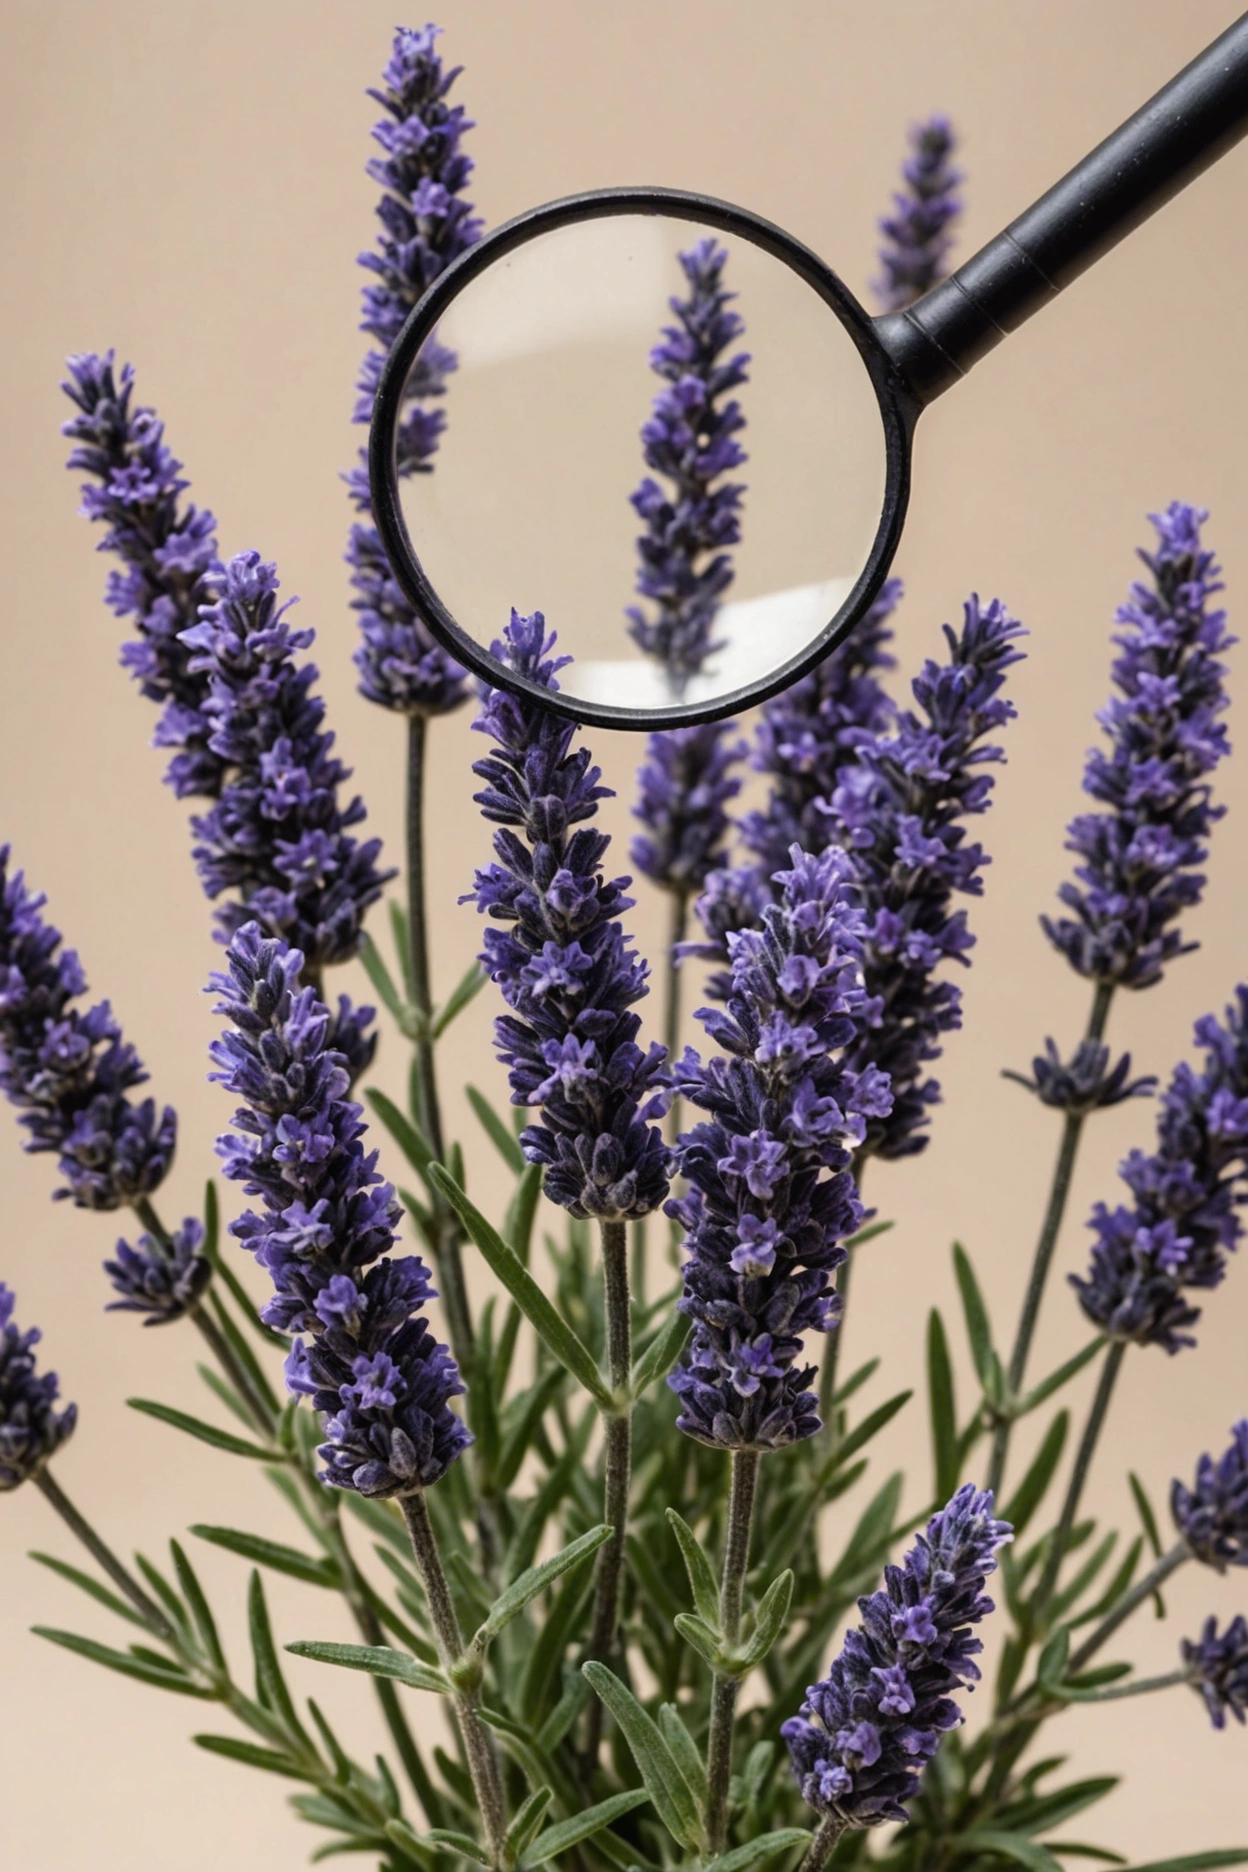 "Close-up of a distressed lavender plant with blackened leaves and stems, next to a magnifying glass, contrasting healthy blooms."